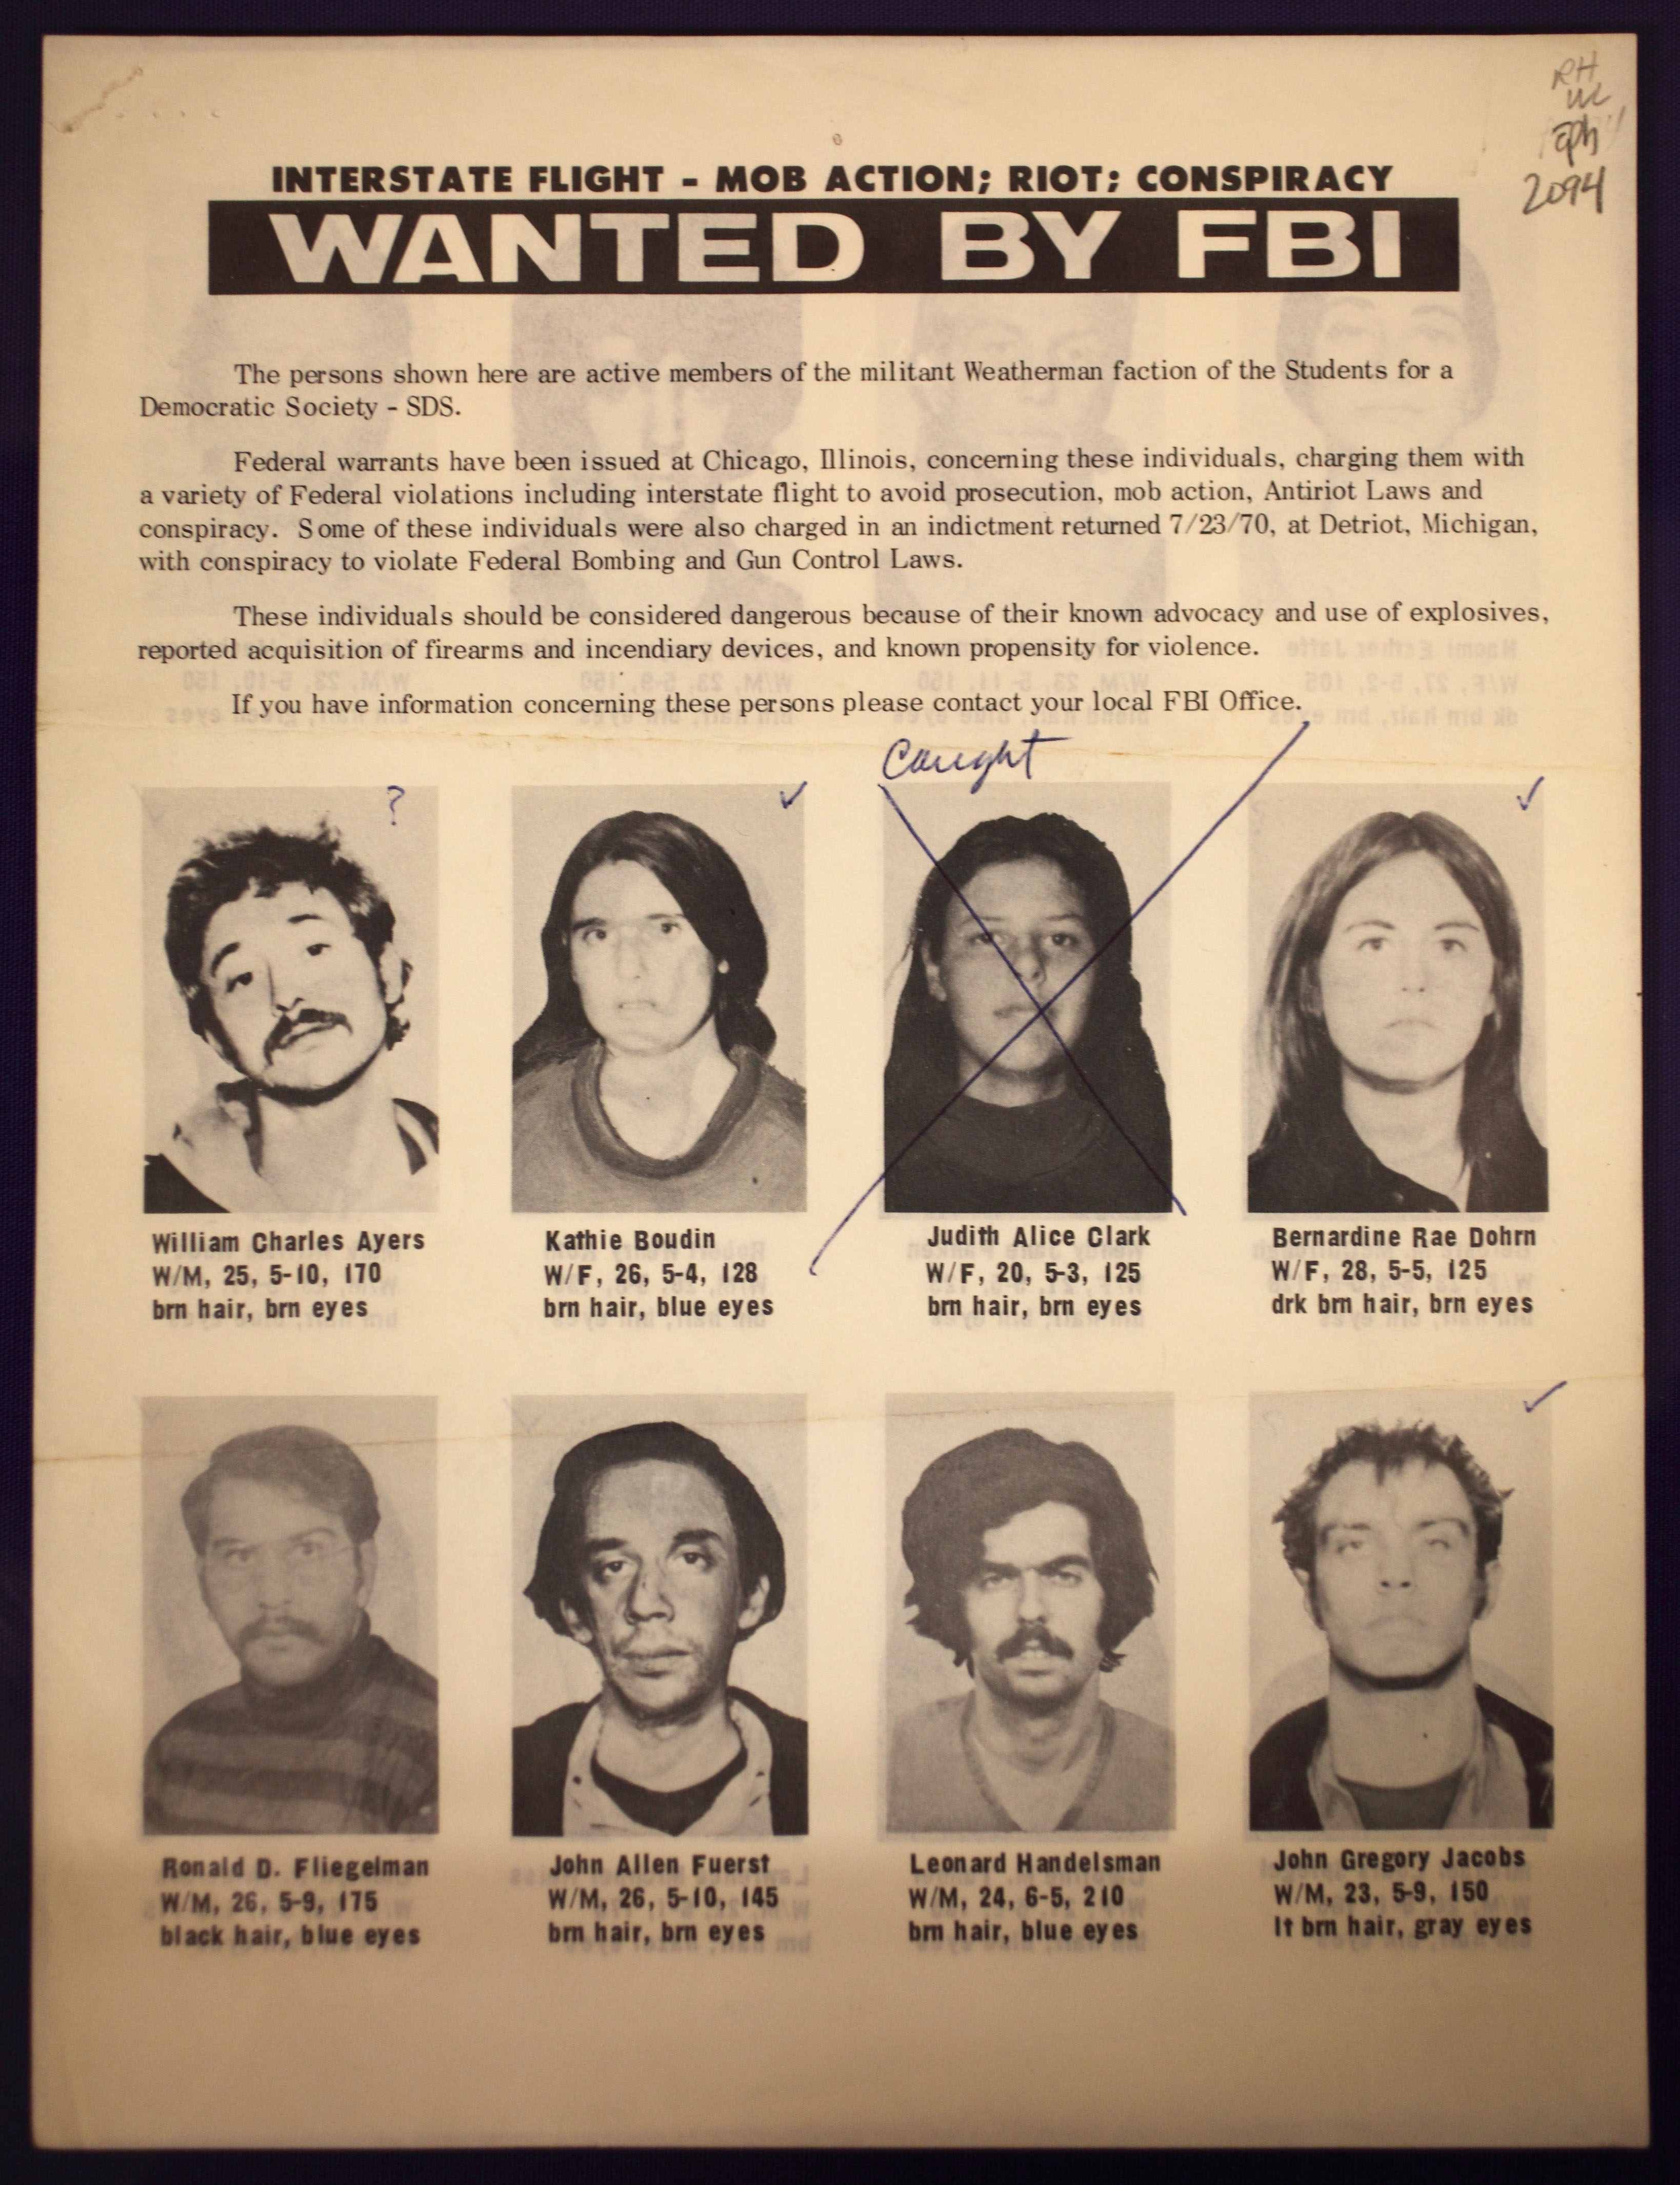 Wanted By Fbi Posters - Bank2home.com